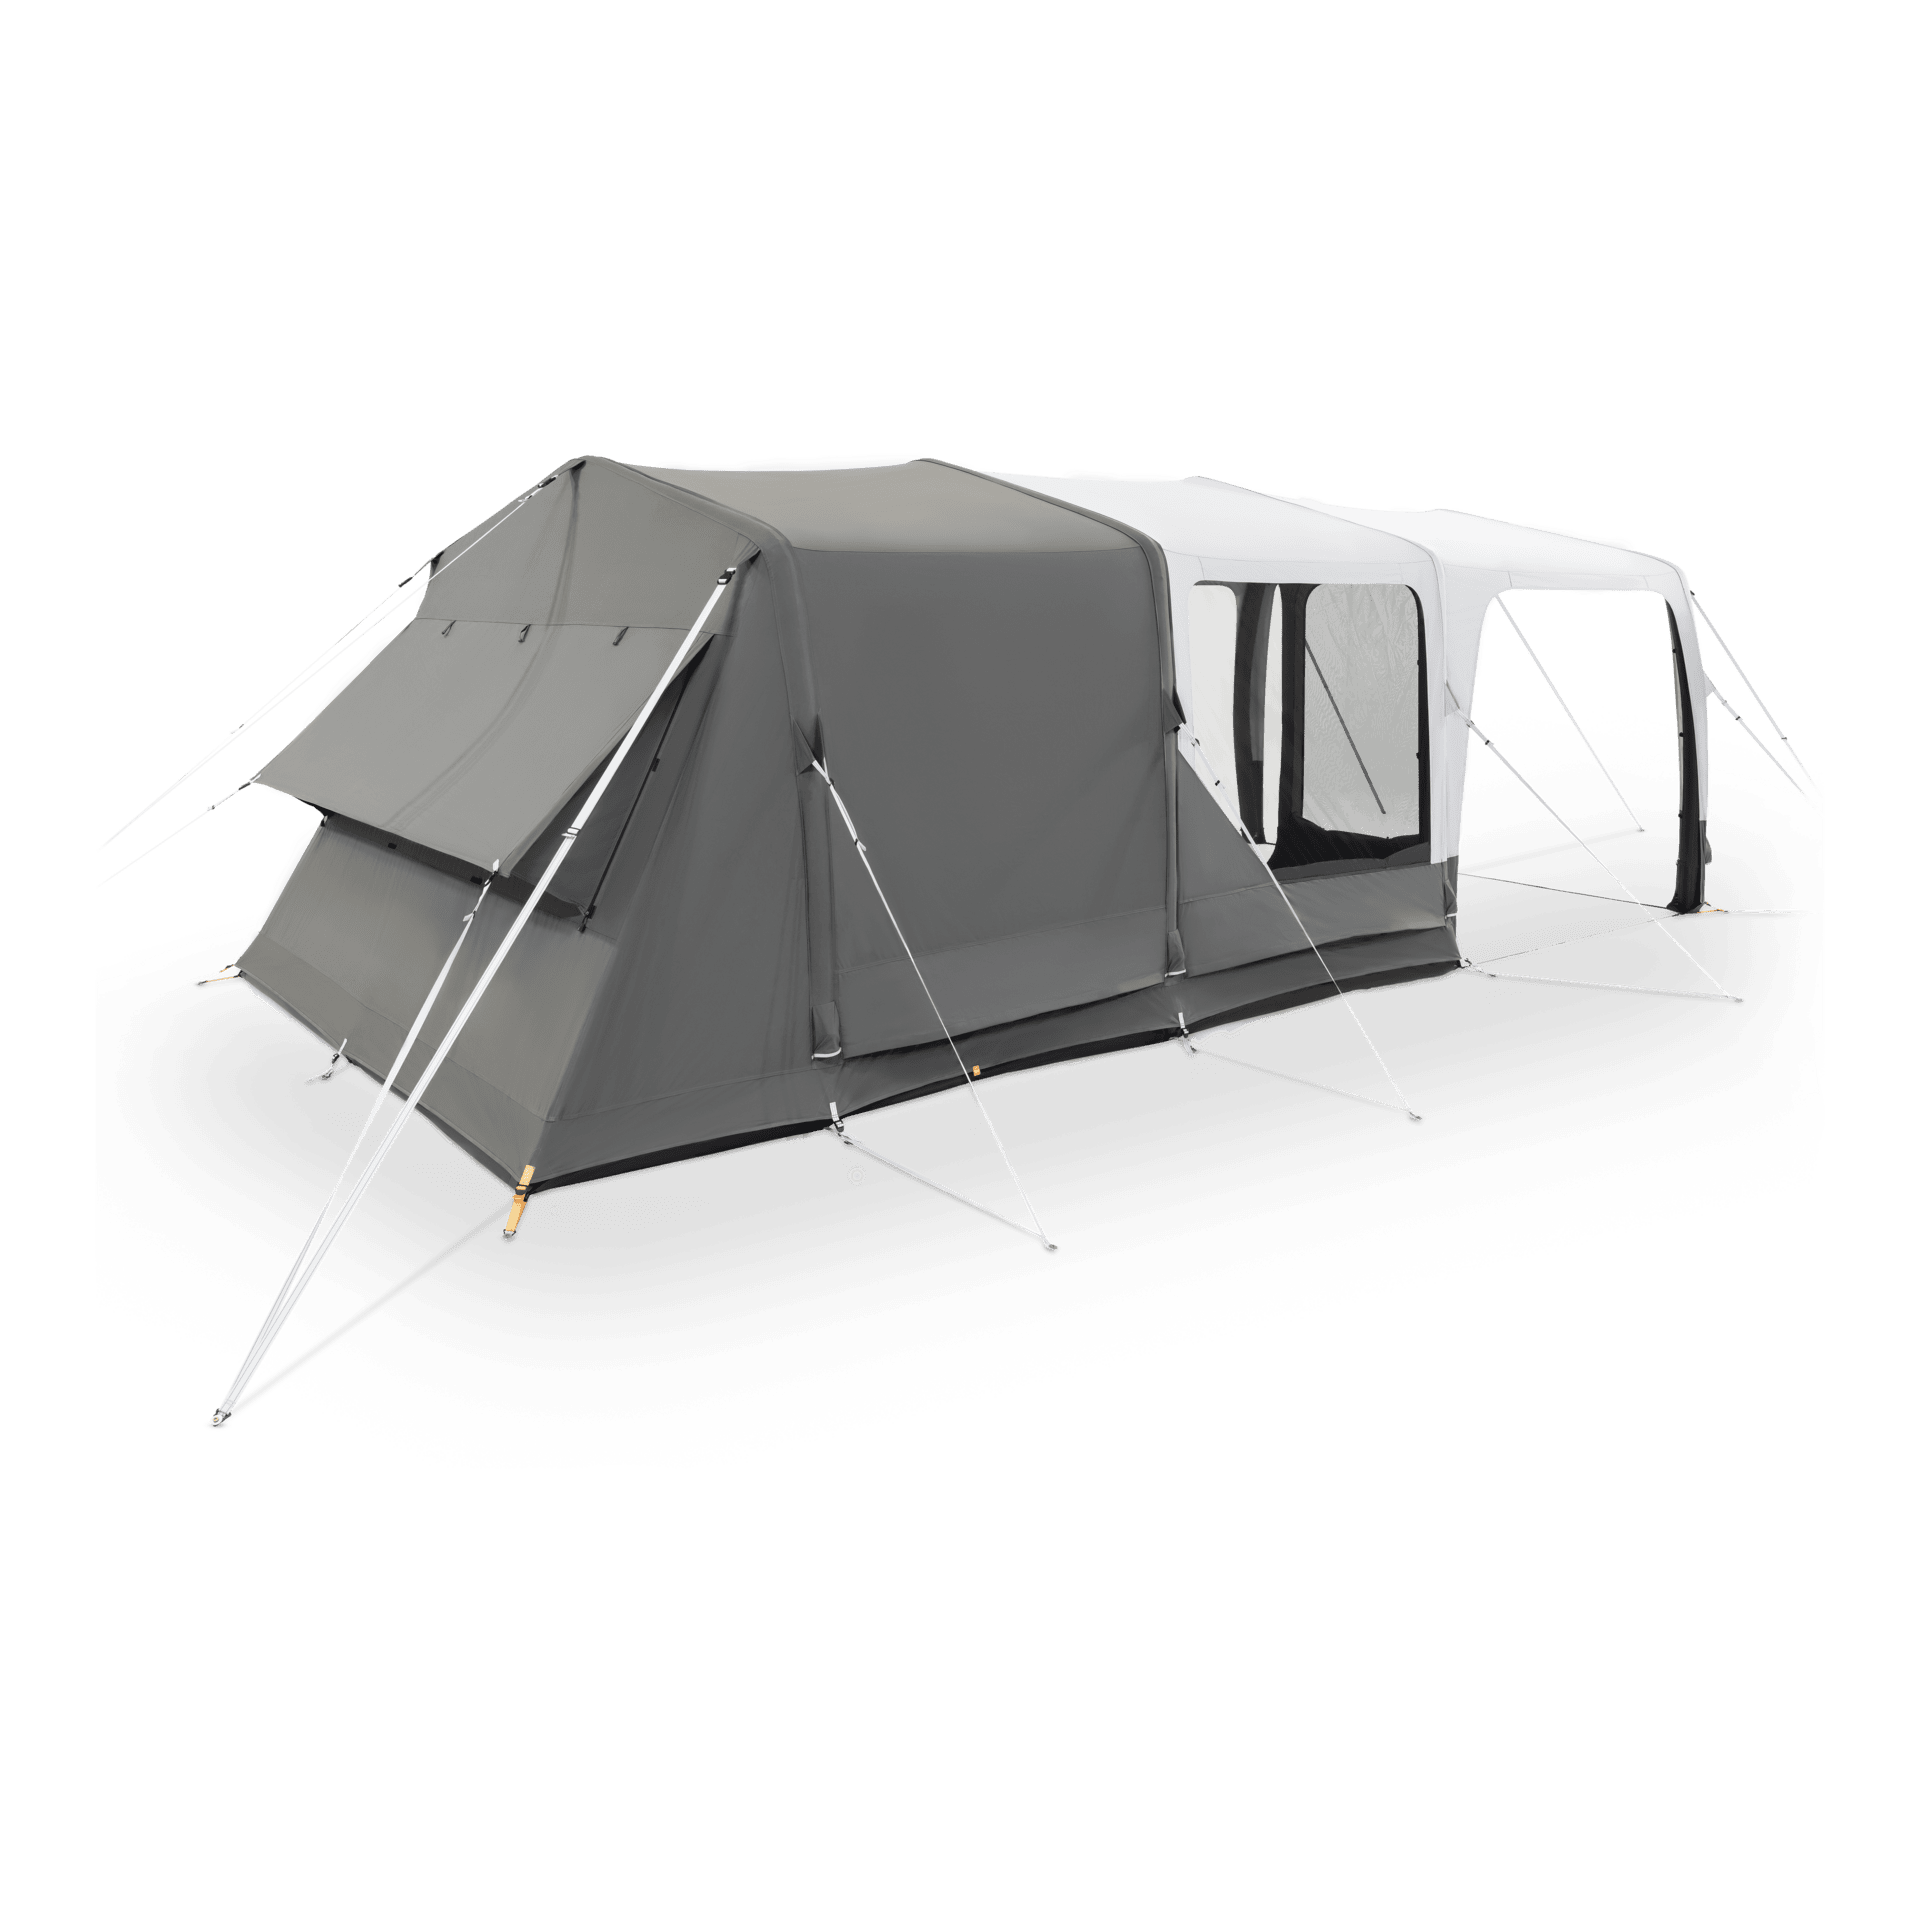 2021 Camping tents | Dometic International